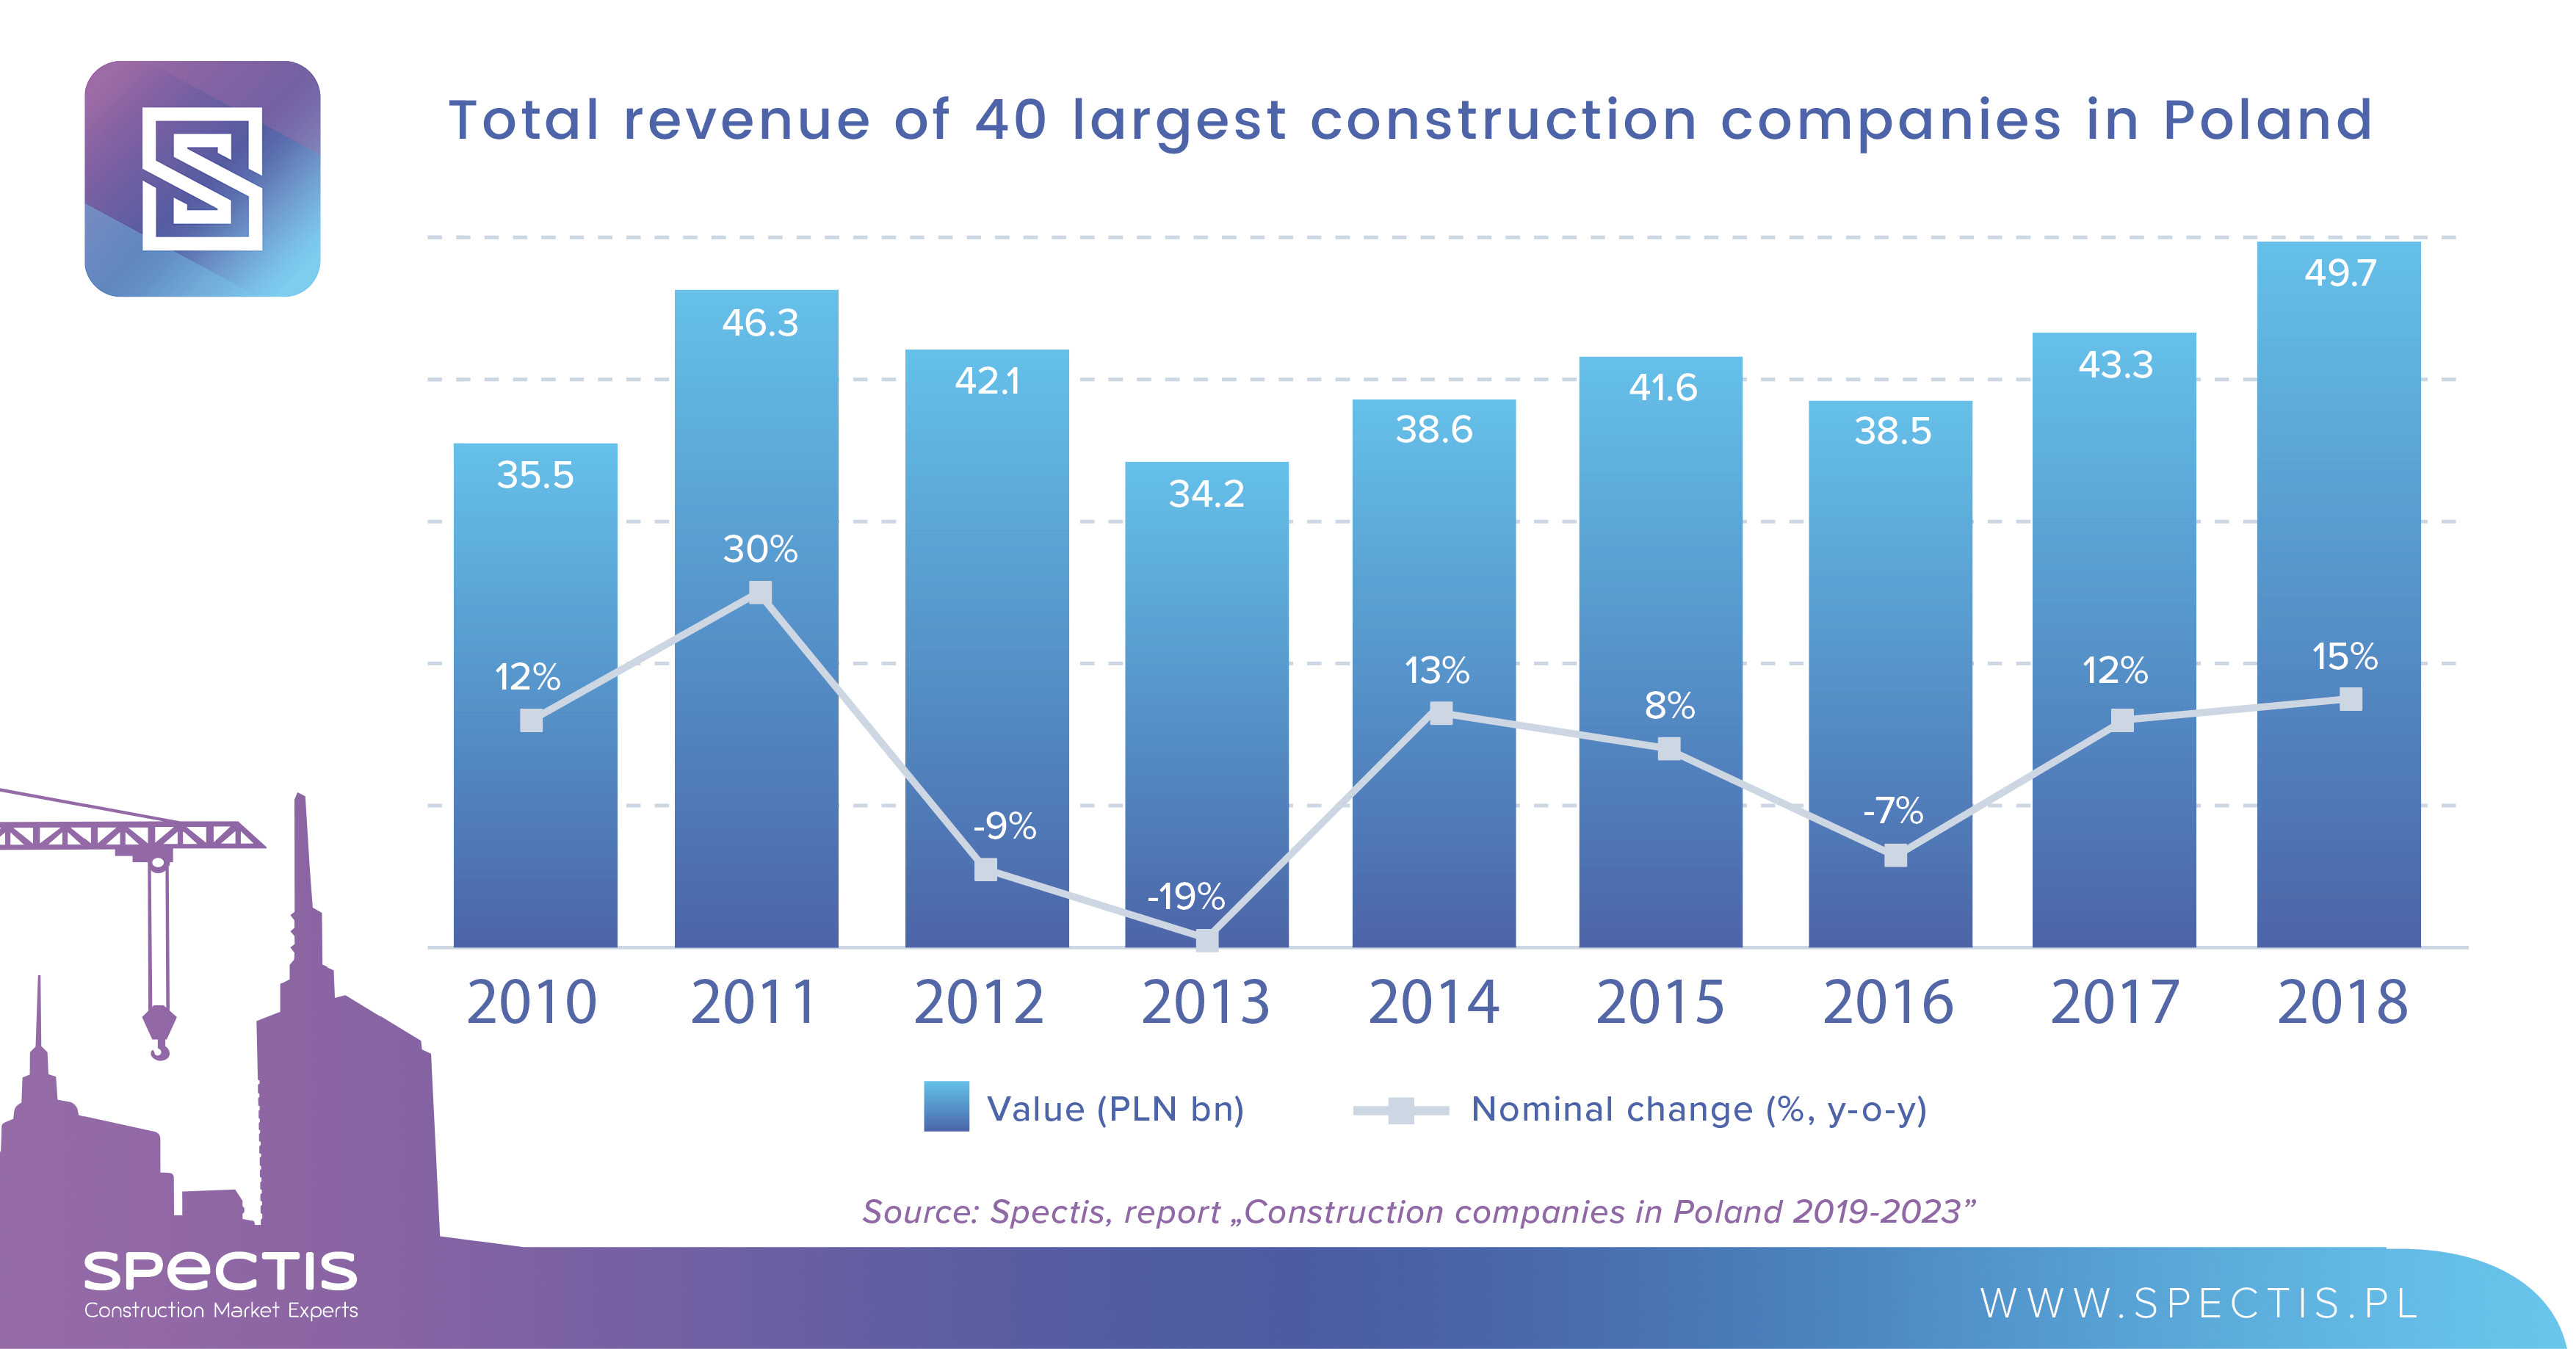 40 largest construction companies in Poland post a record PLN 50bn in revenue